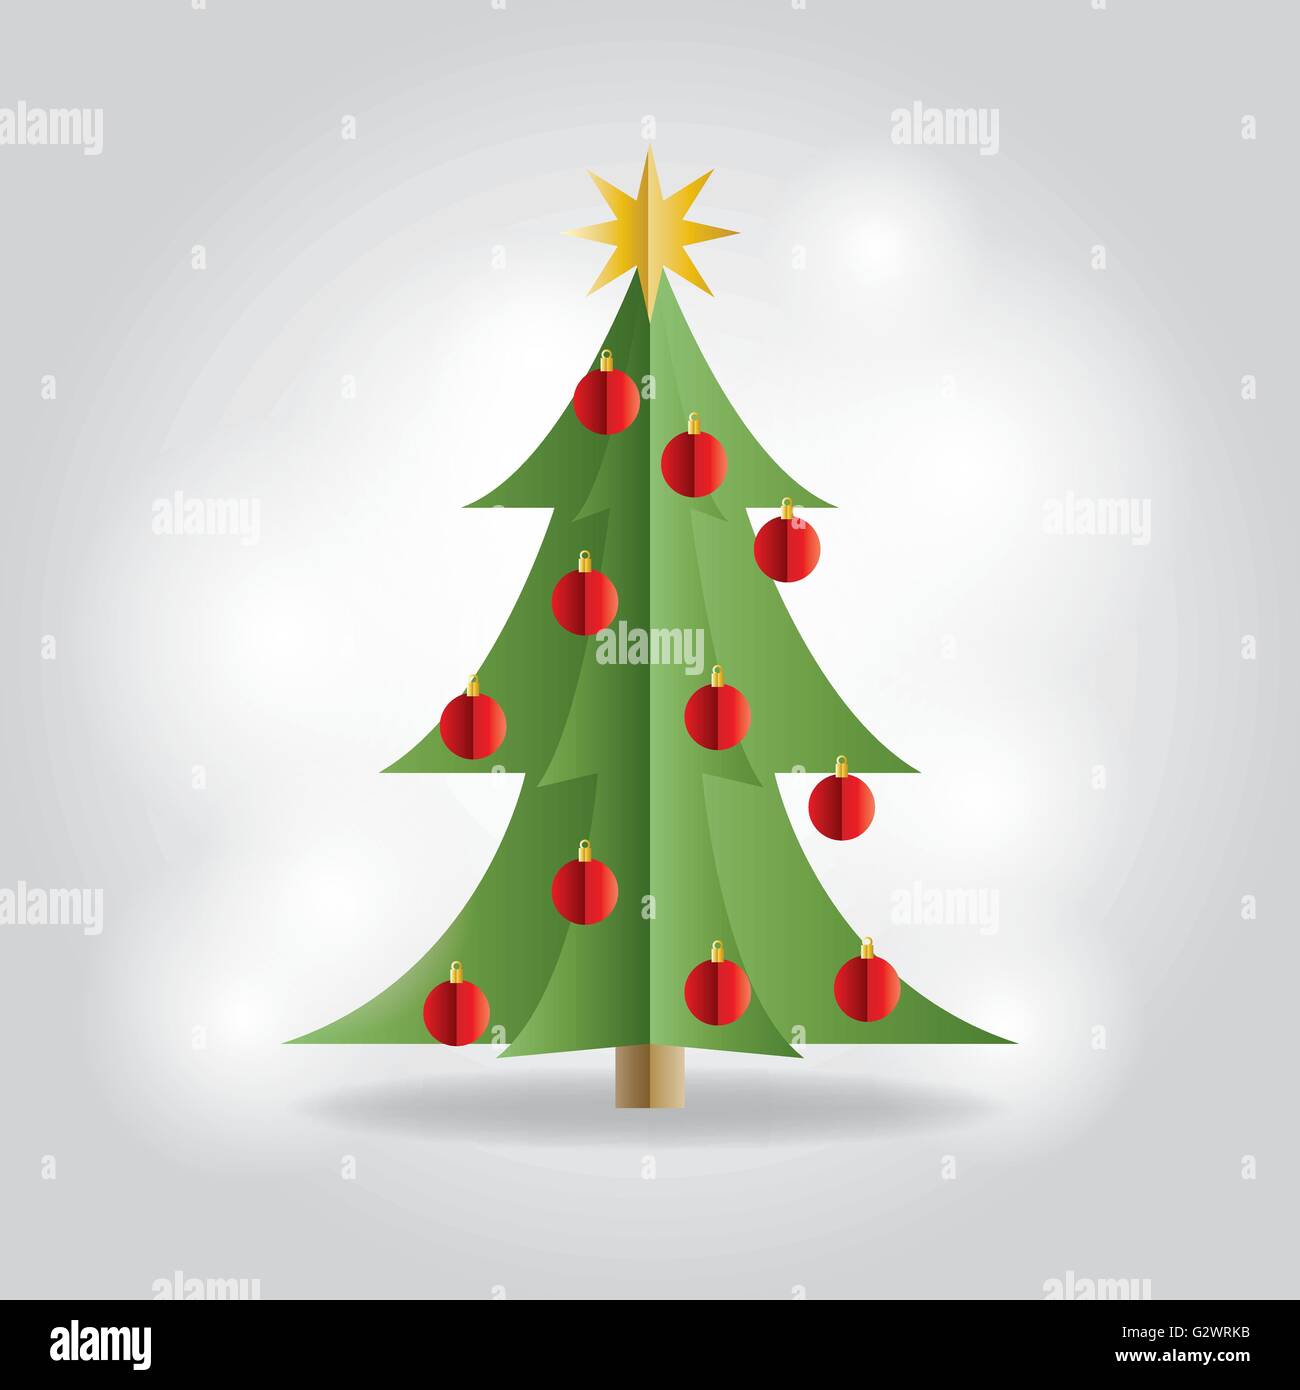 An illustration of a flat design Christmas Holiday tree. Vector EPS 10 available. EPS contains gradient mesh in dropshadow. Stock Vector